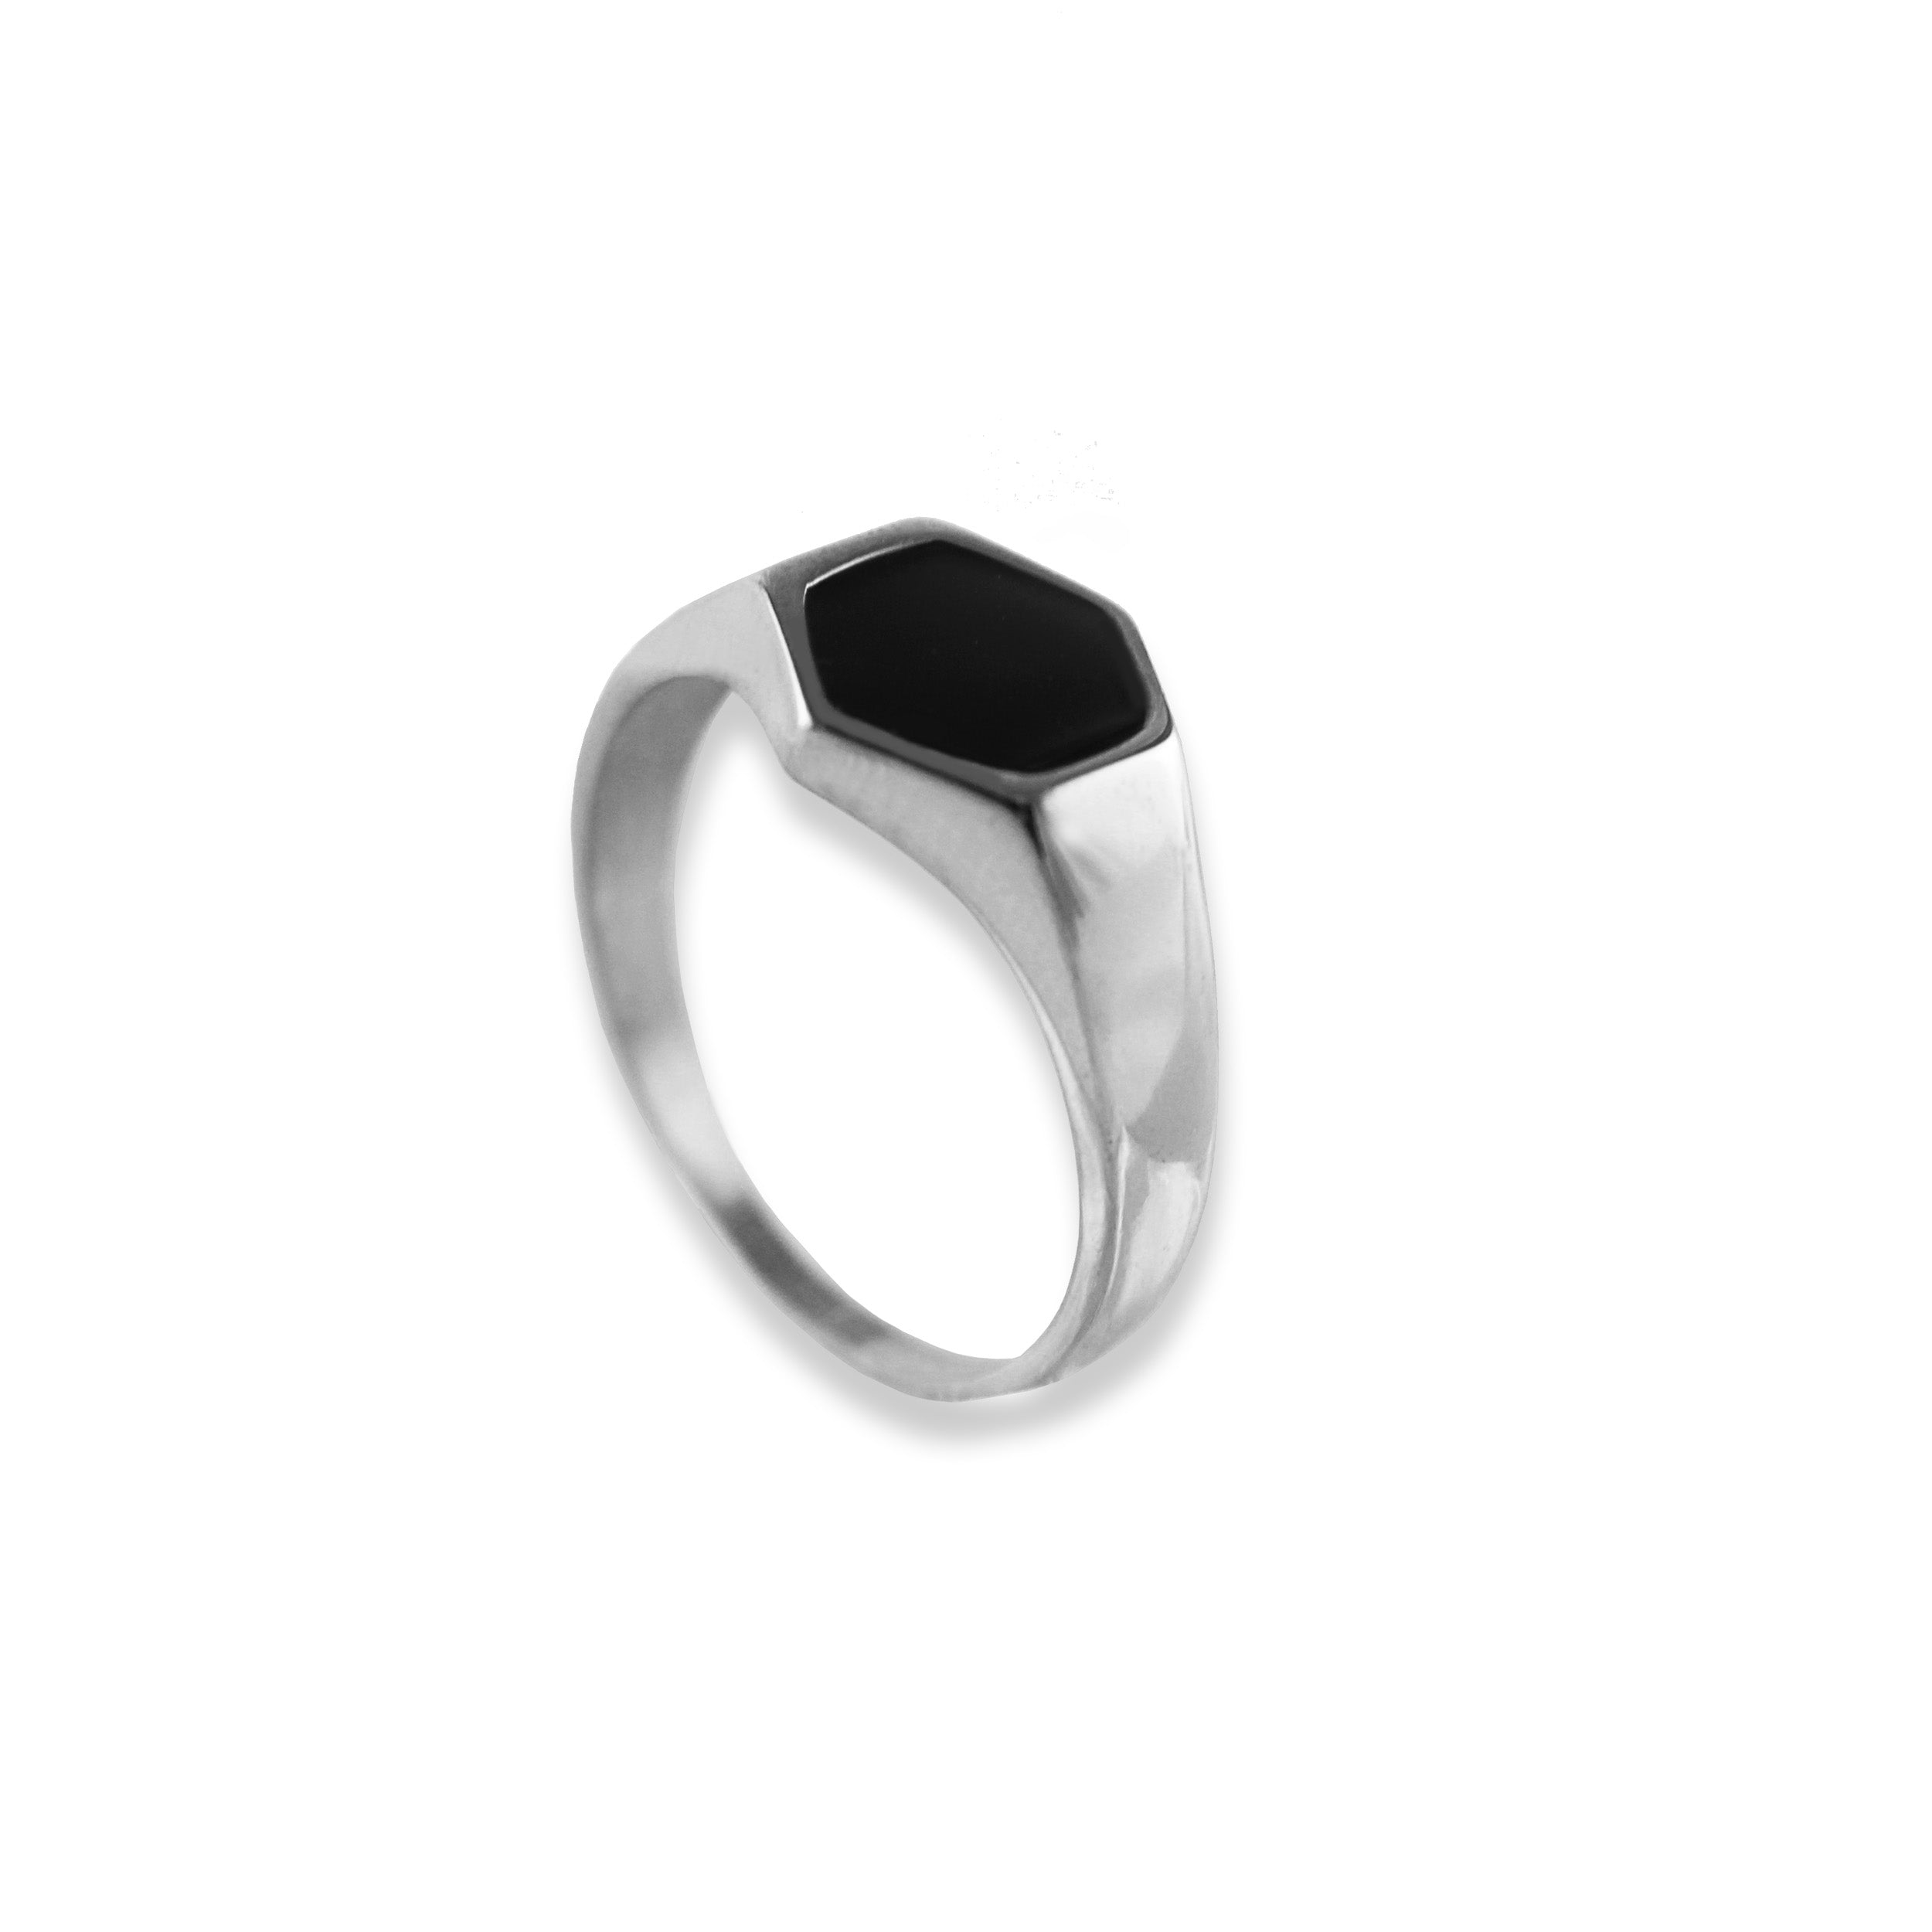 Bedok women's ring by Five Jwlry, featuring a signet style with a black flat hexagon top. Available in 14k gold or silver, crafted from water-resistant 316L stainless steel. Hypoallergenic with a 2-year warranty.